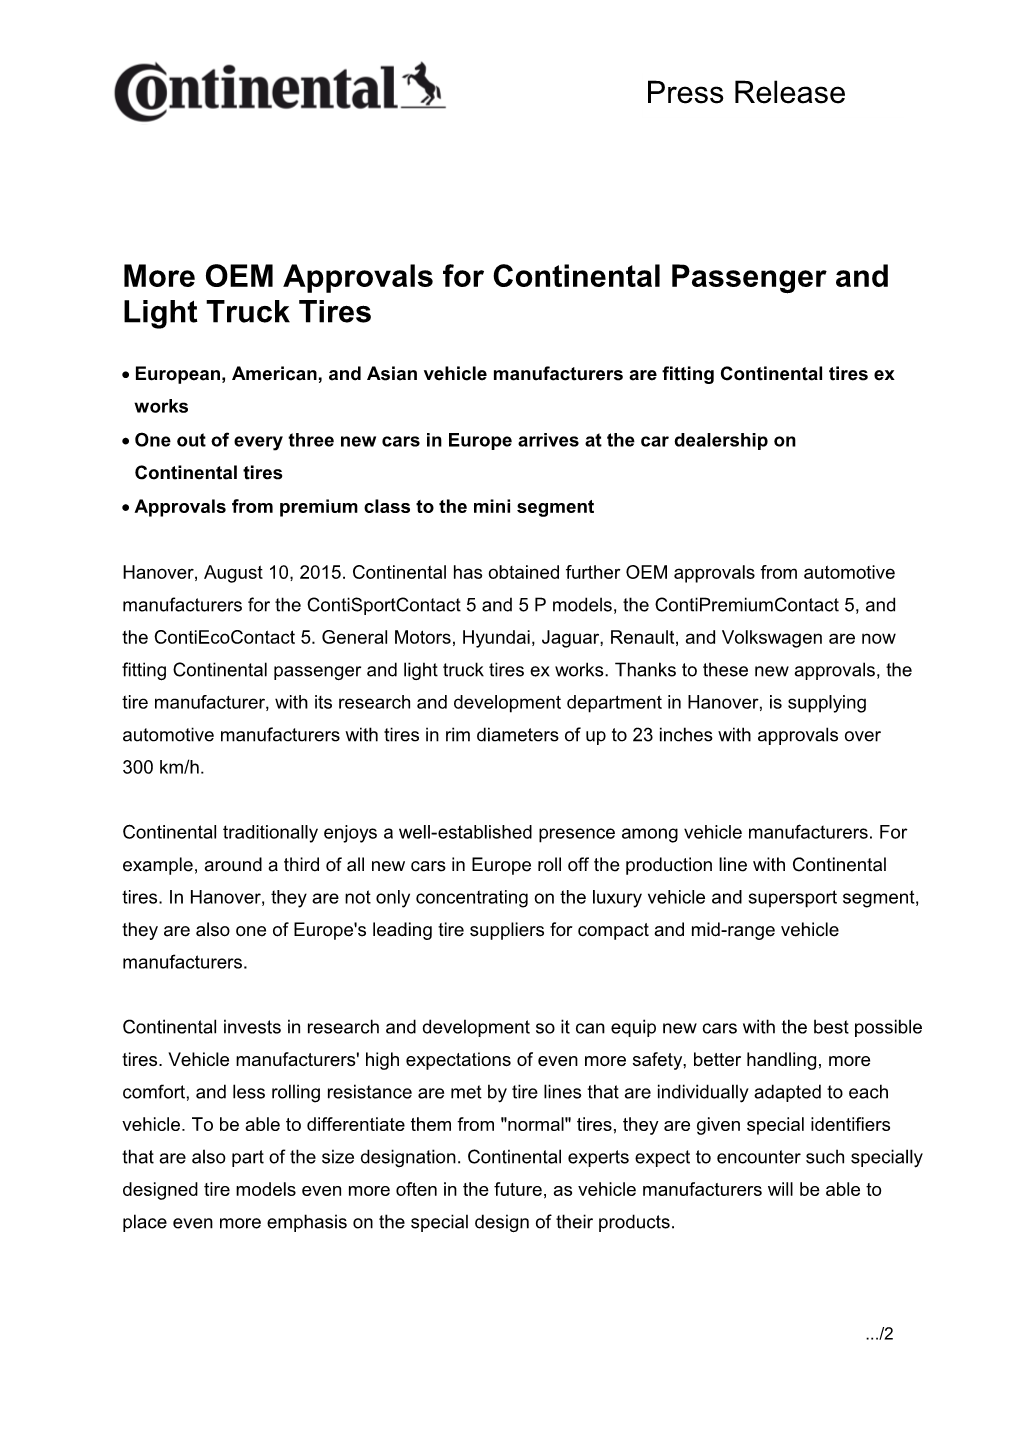 More OEM Approvals for Continental Passenger and Light Truck Tires